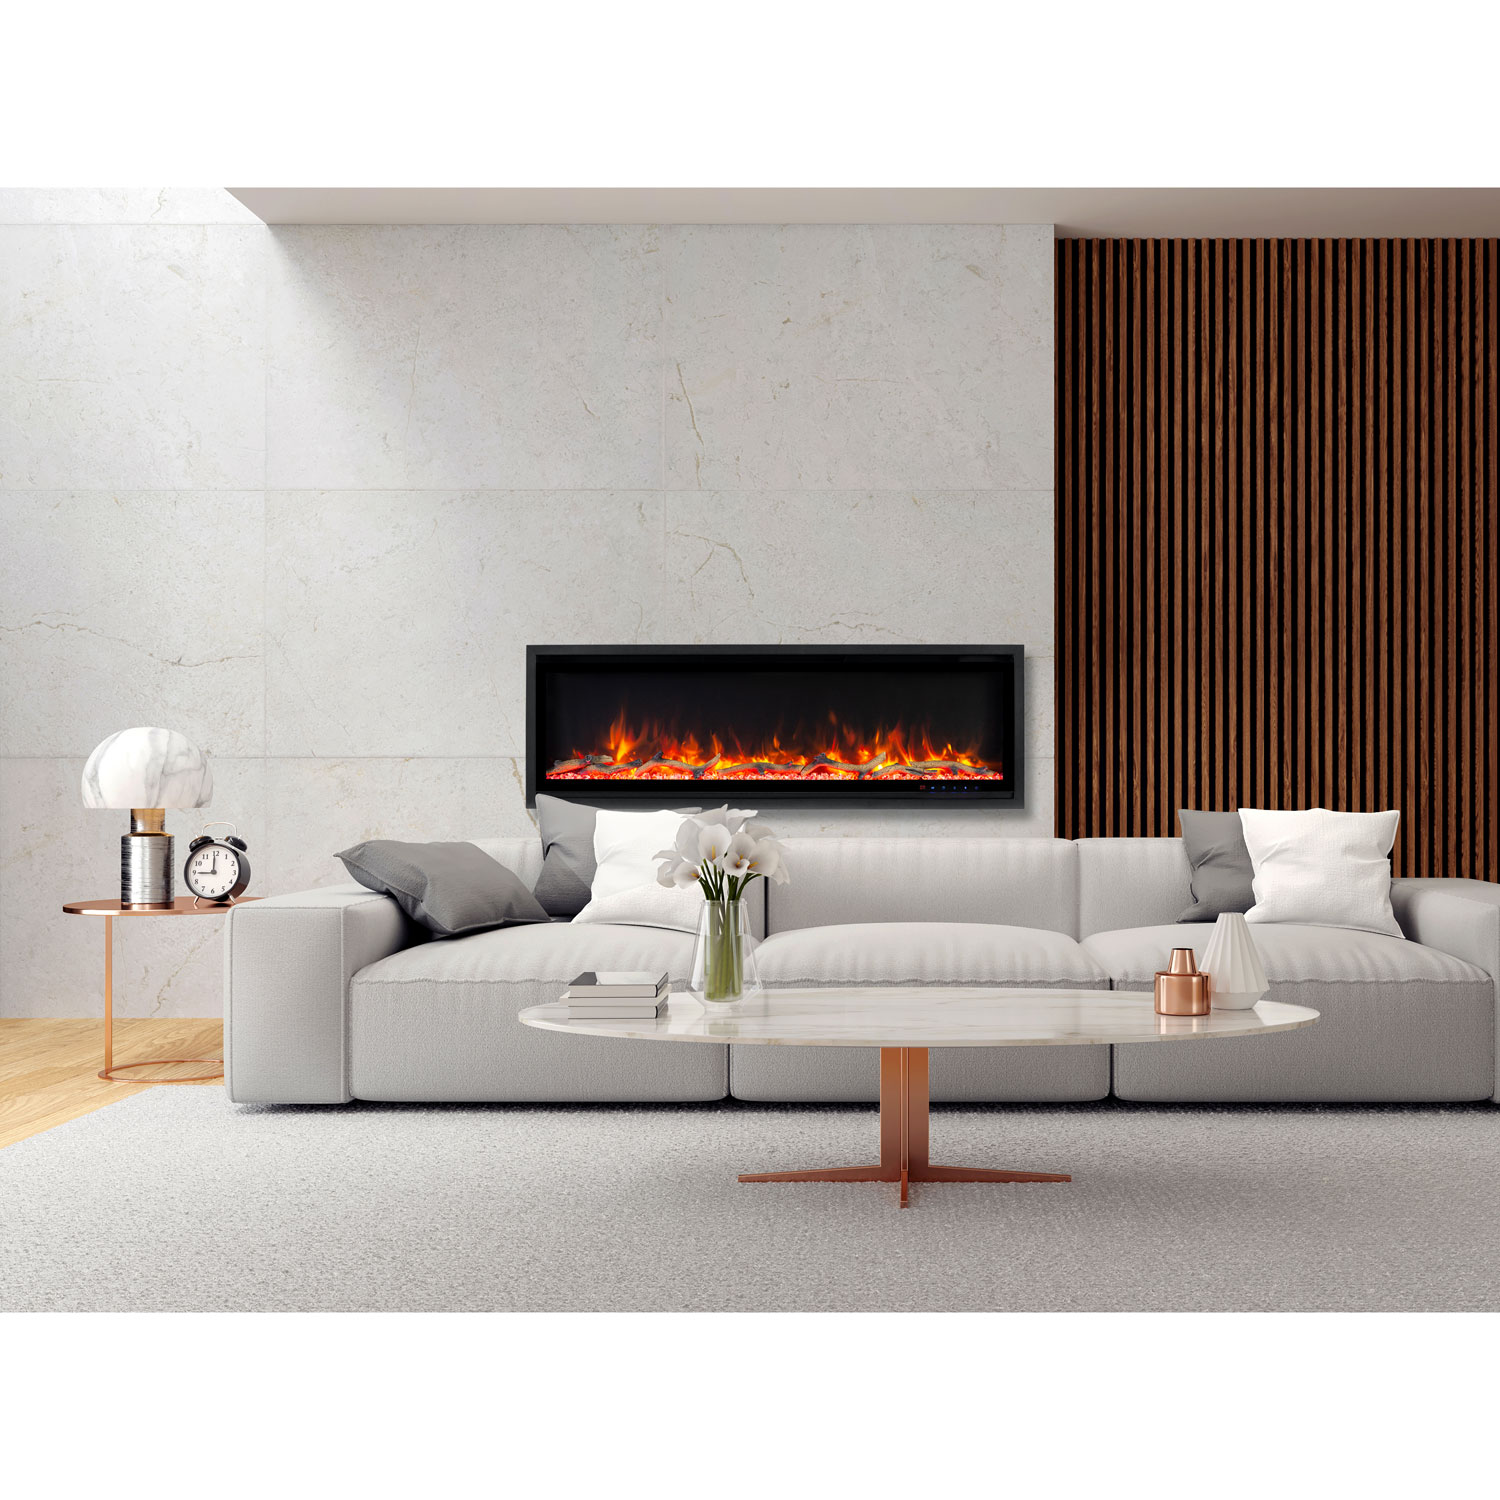 Paramount Kennedy II Commercial Grade Recessed and Surface Mounted Electric Fireplace EF-WM502 42 Black 